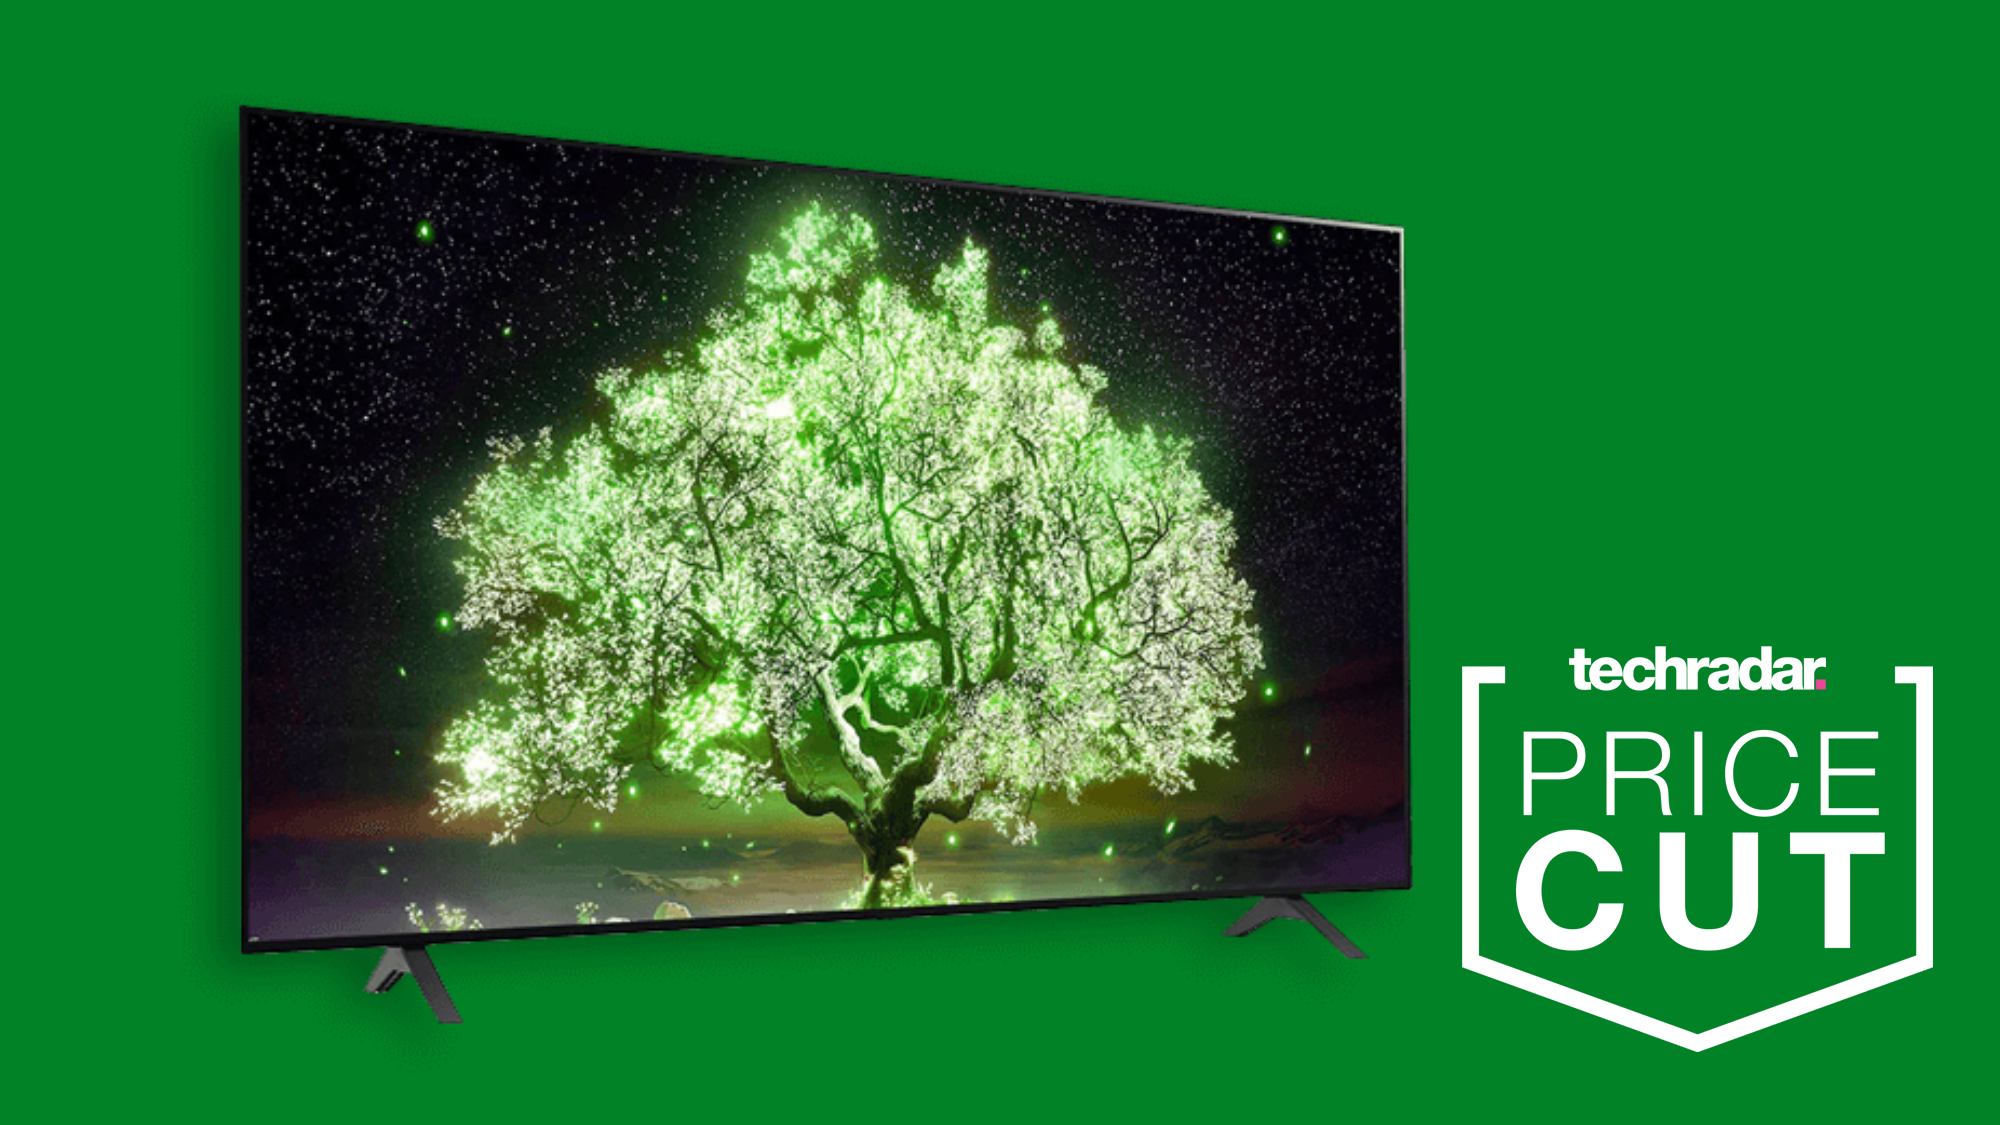 This £599 LG OLED TV is the best 4K TV deal we've seen this year